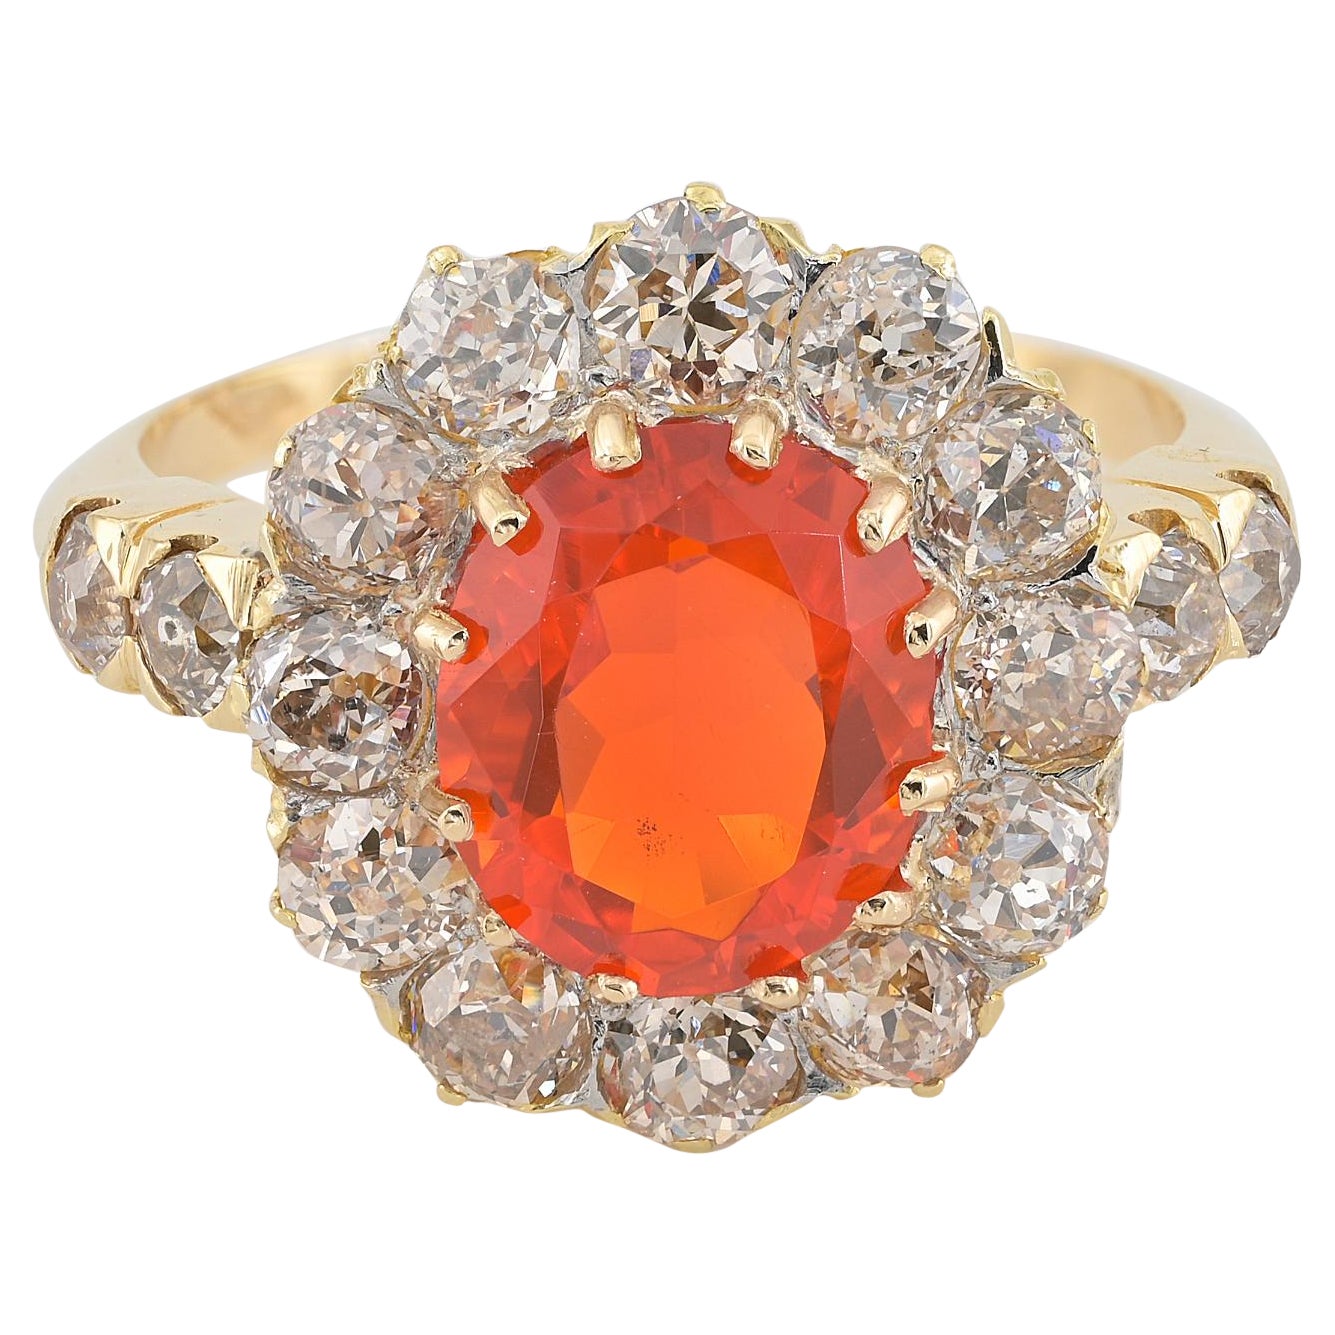 Victorian Fire Opal and Diamond ring